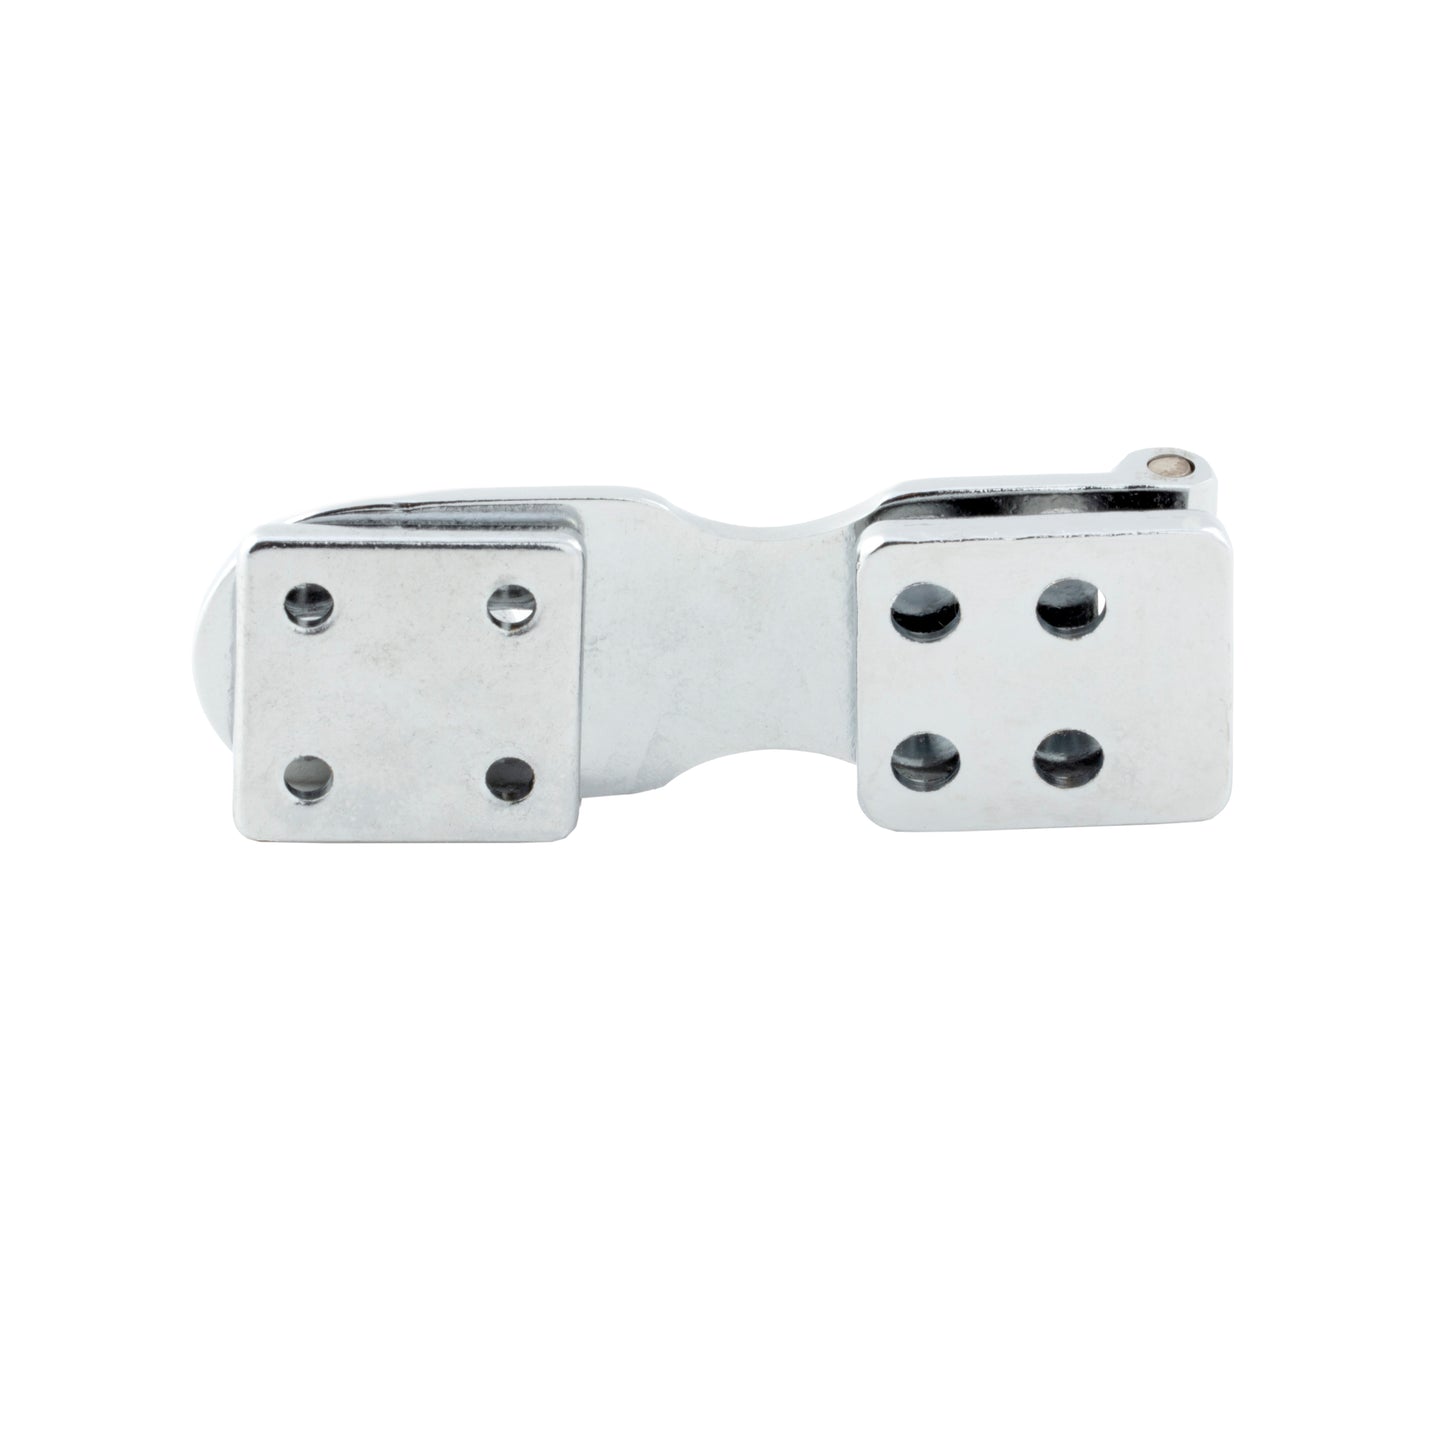 Fixed Safety Hasp (1" x 3") - S-4052